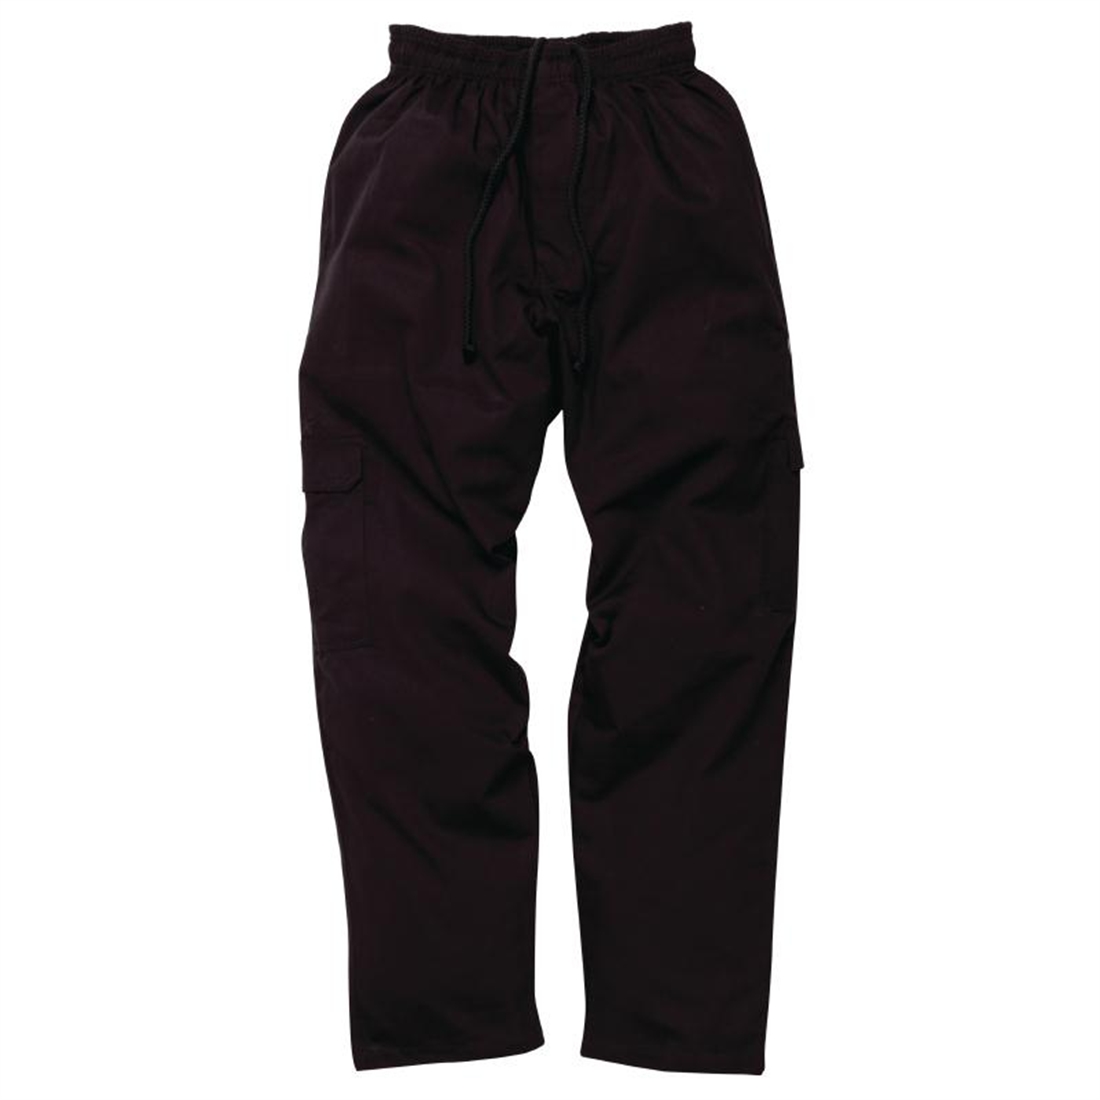 Chef Works Mens J54 Cargo Trousers Black 2XL